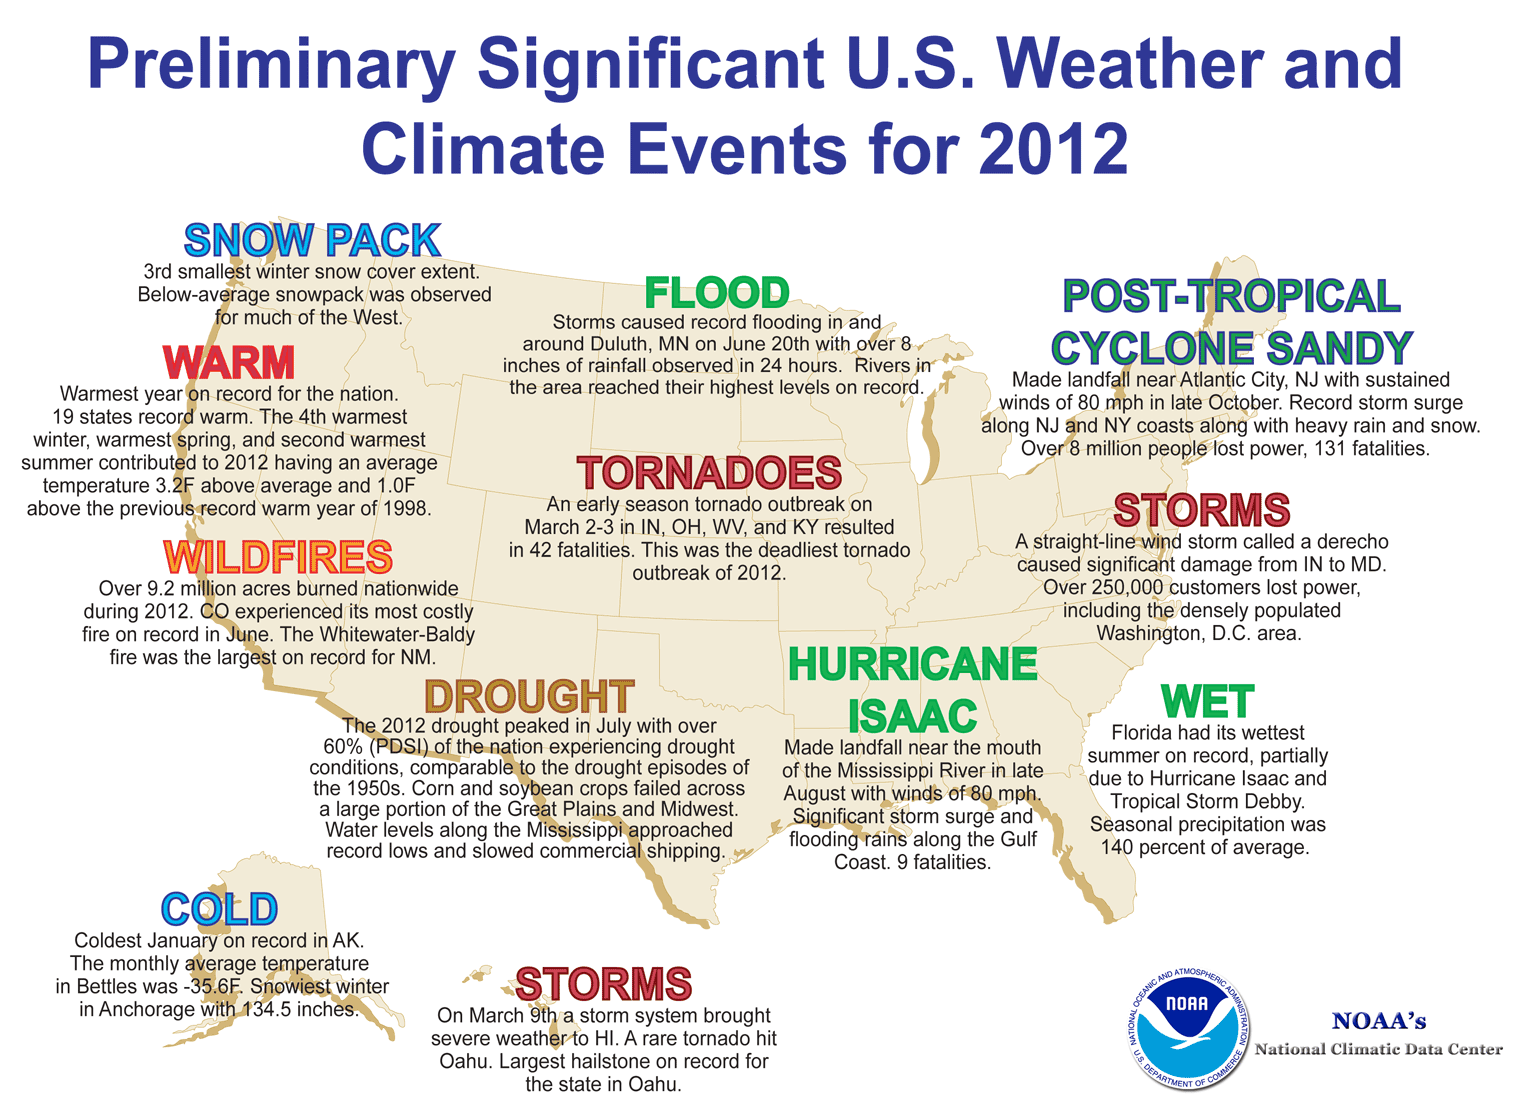 2012 was warmest and second most extreme year on record for the contiguous U.S.